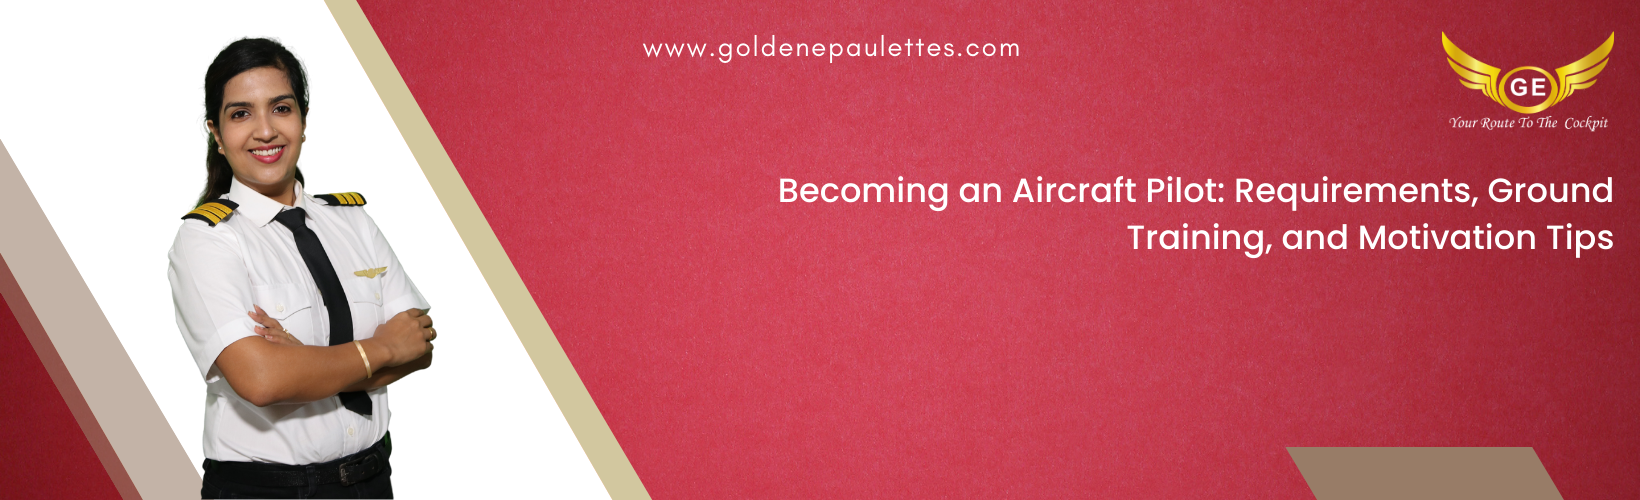 The Requirements for Becoming an Aircraft Pilot